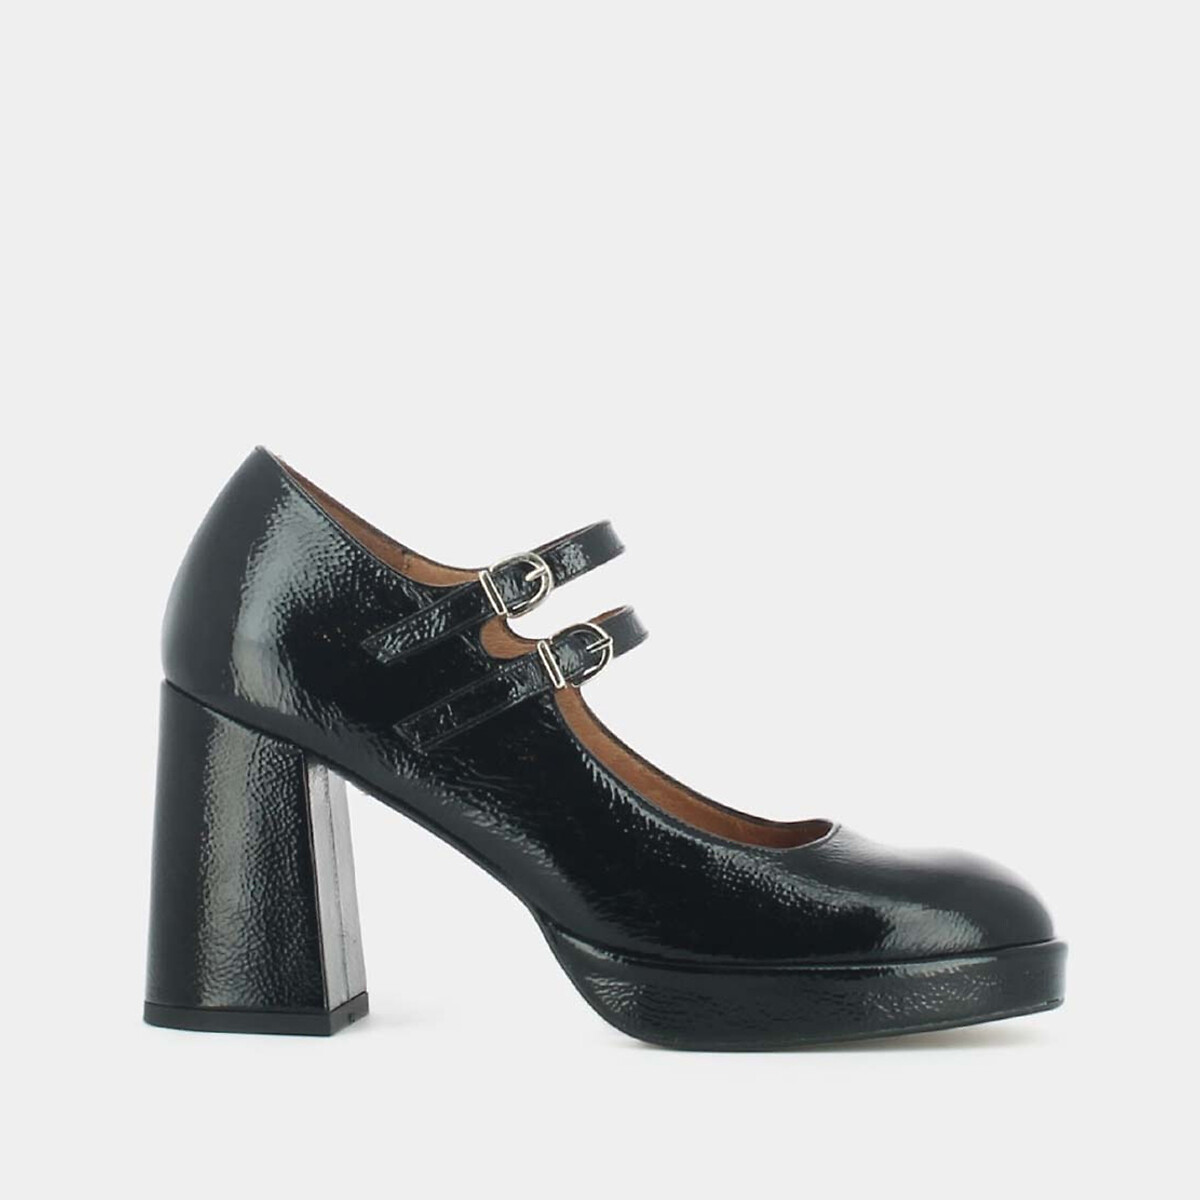 Verite Mary Janes in Patent Leather